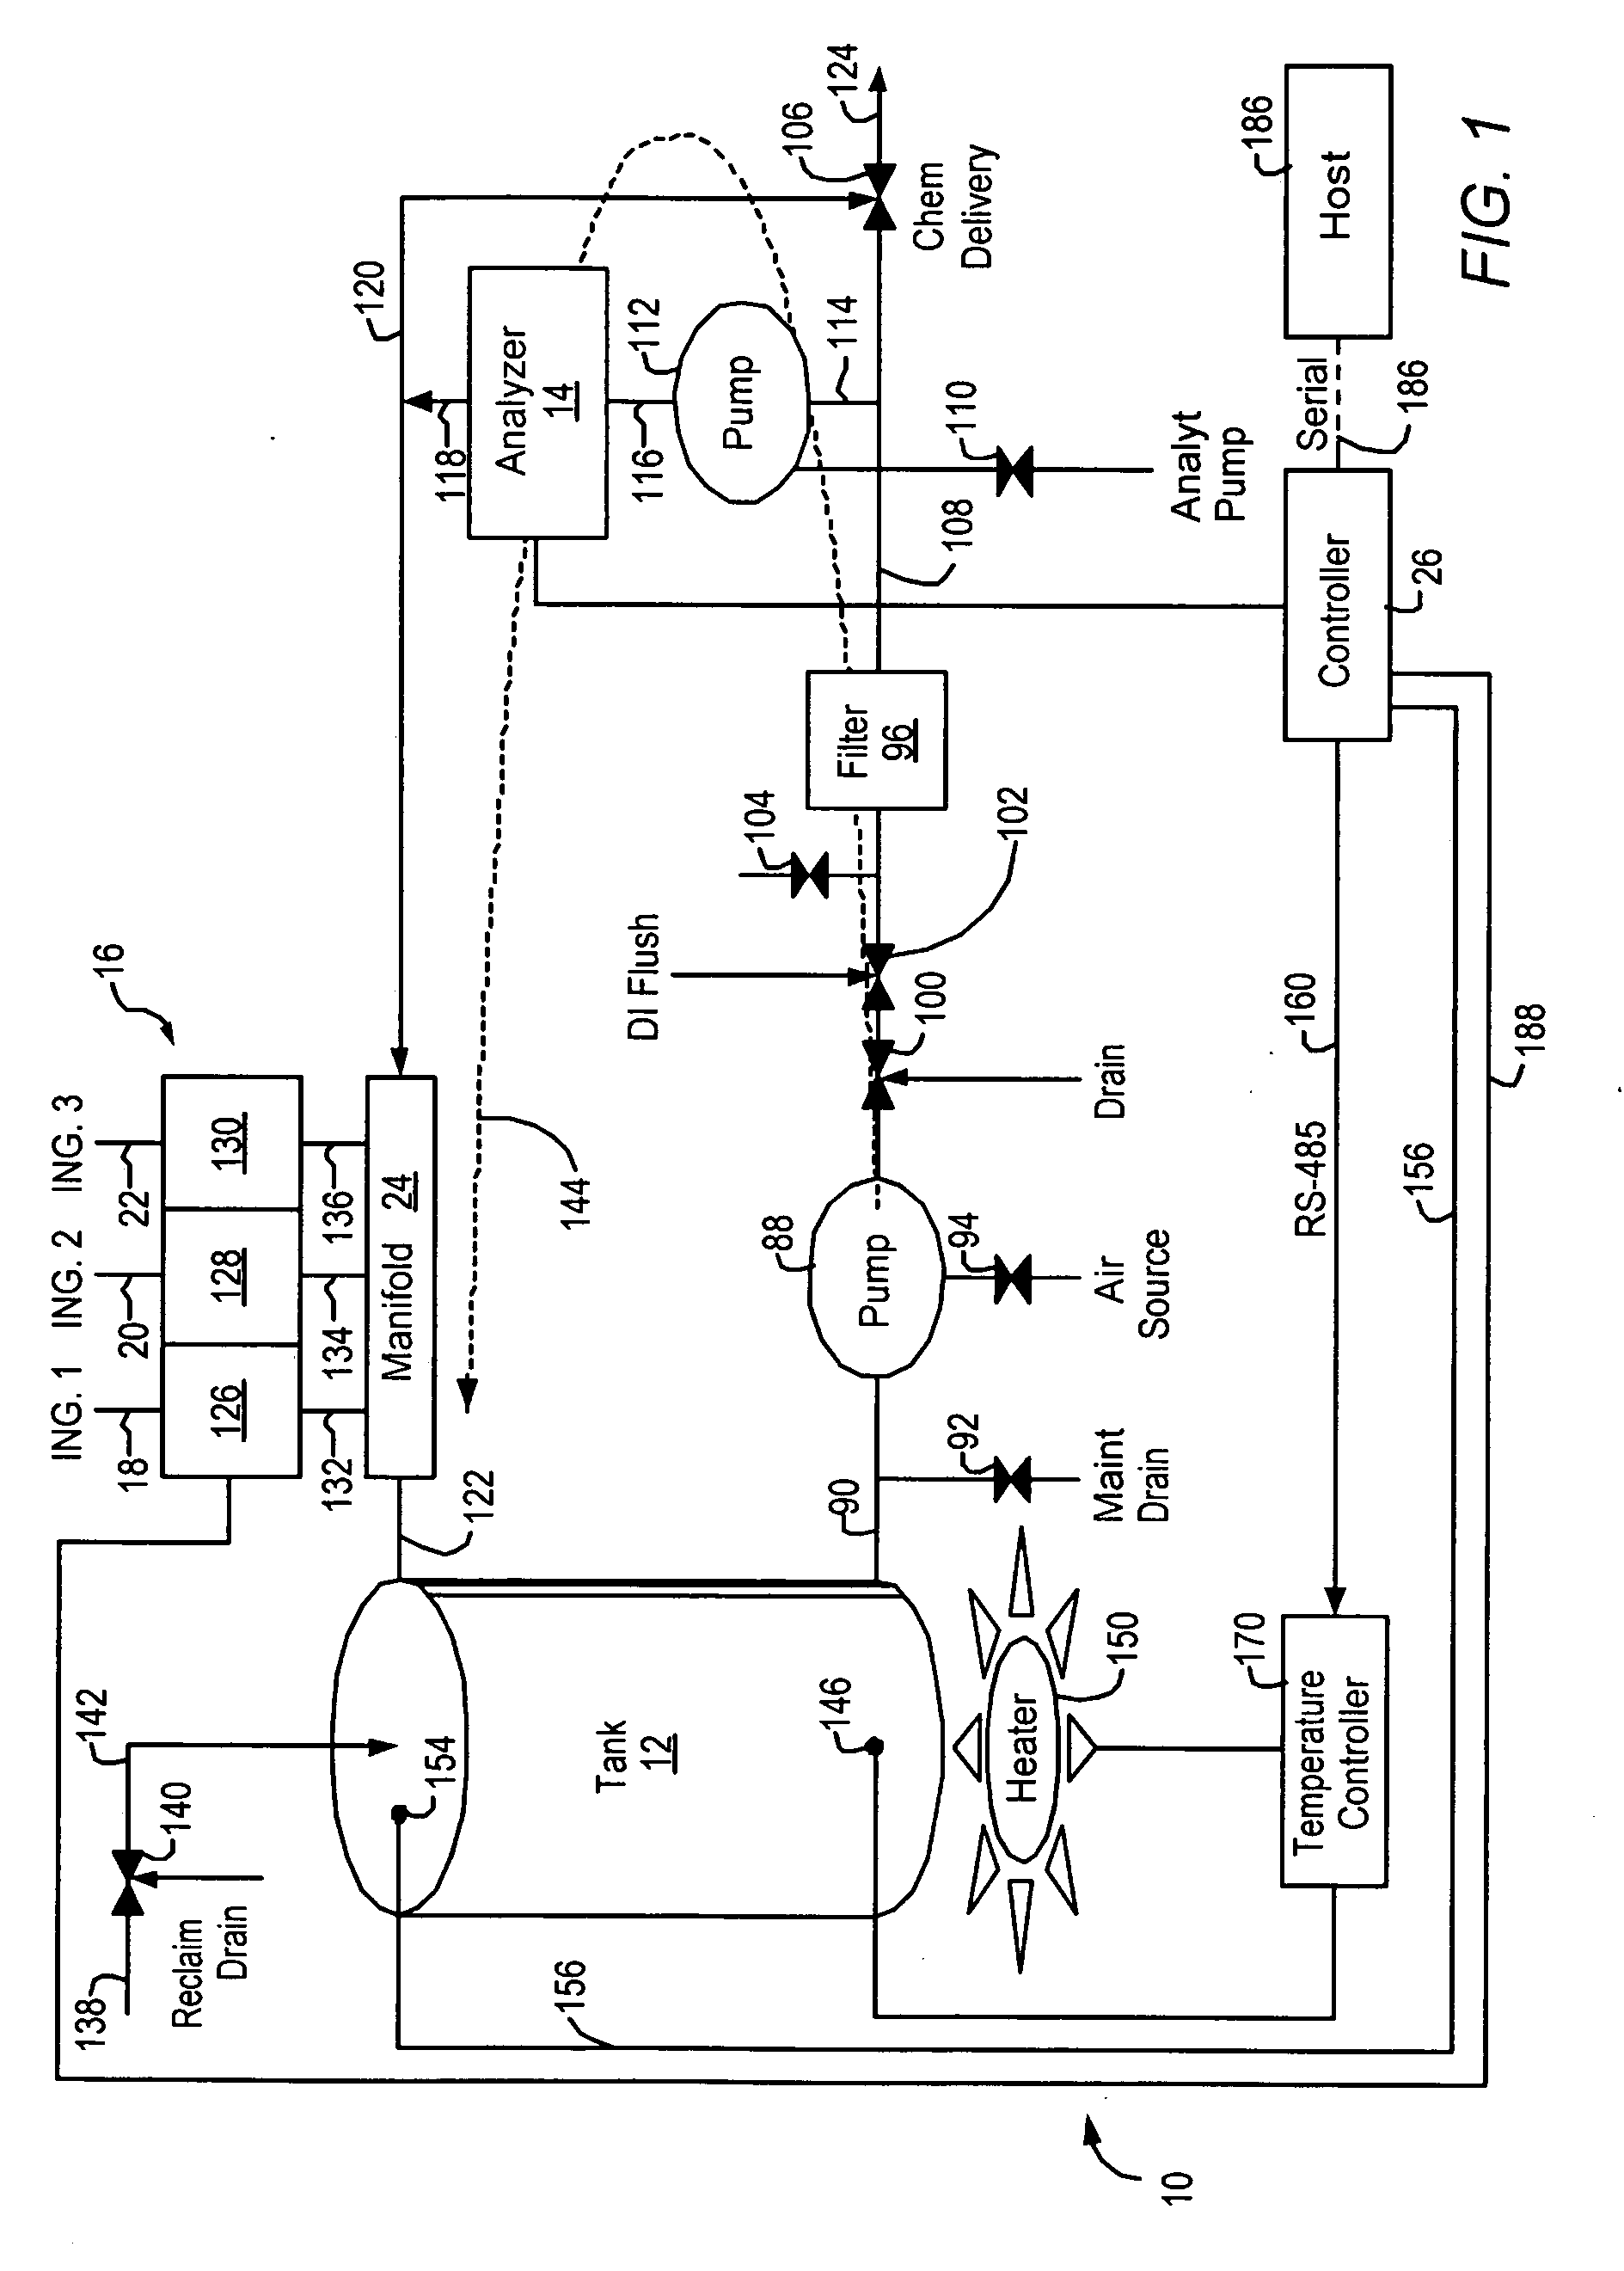 Chemical mixing apparatus, system and method